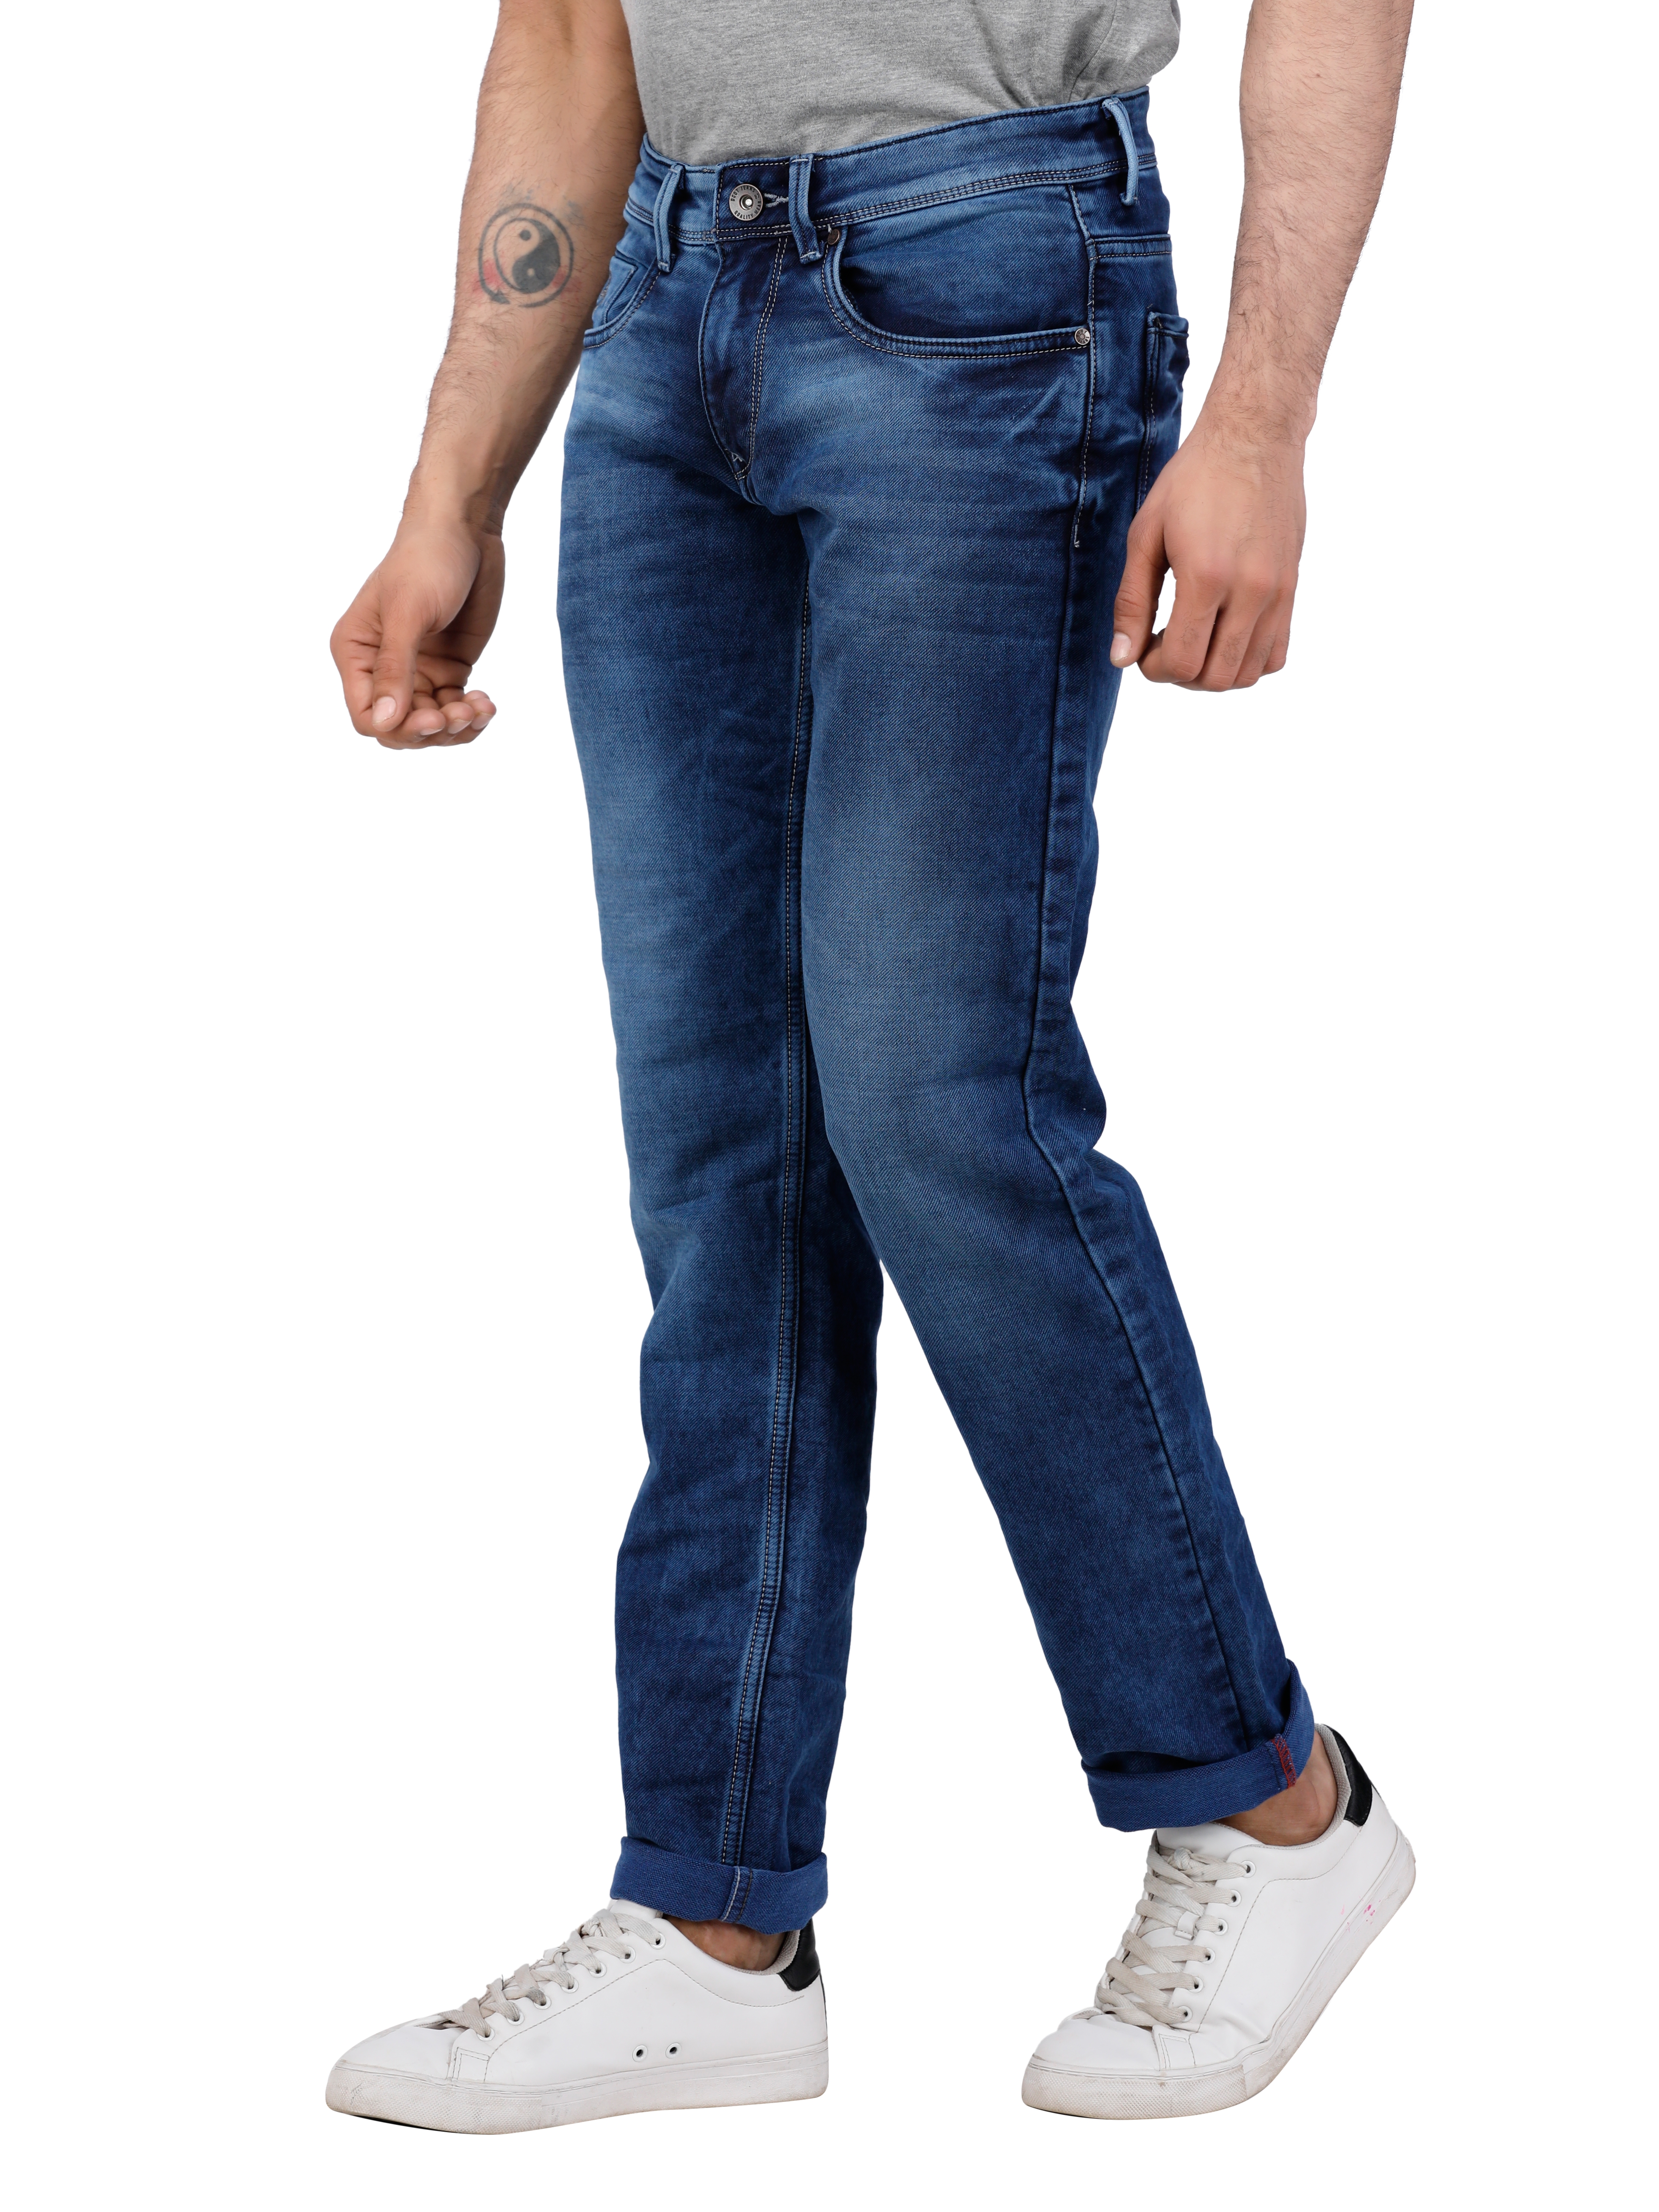 D'cot by Donear | D'cot by Donear Men Blue Cotton Skinny Solid Jeans 2